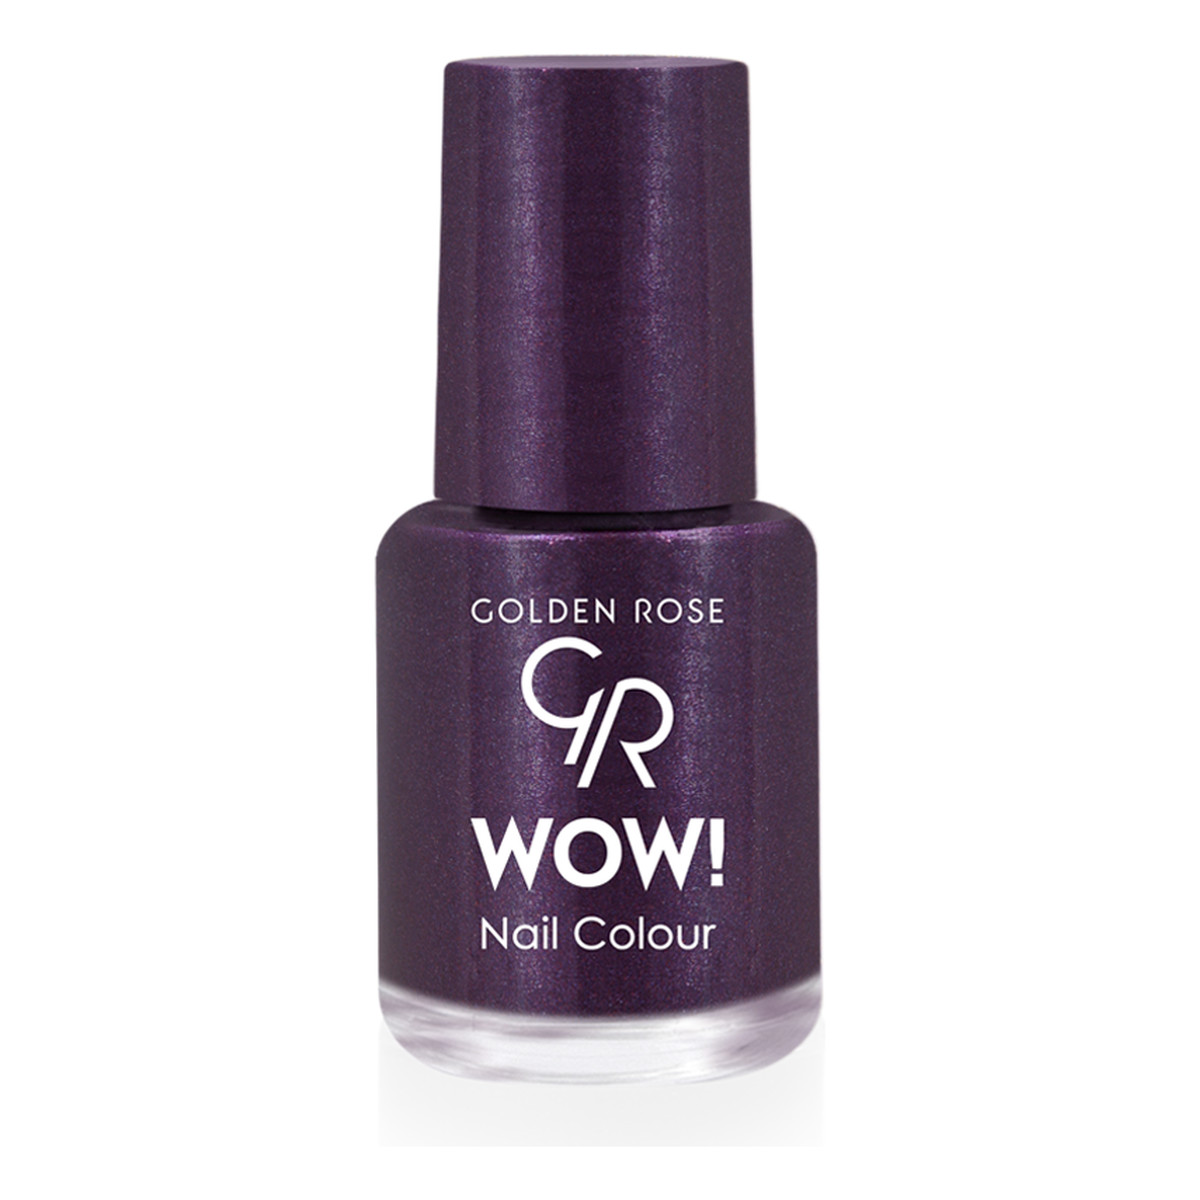 Golden Rose WOW Nail Color Lakier do paznokci 6ml